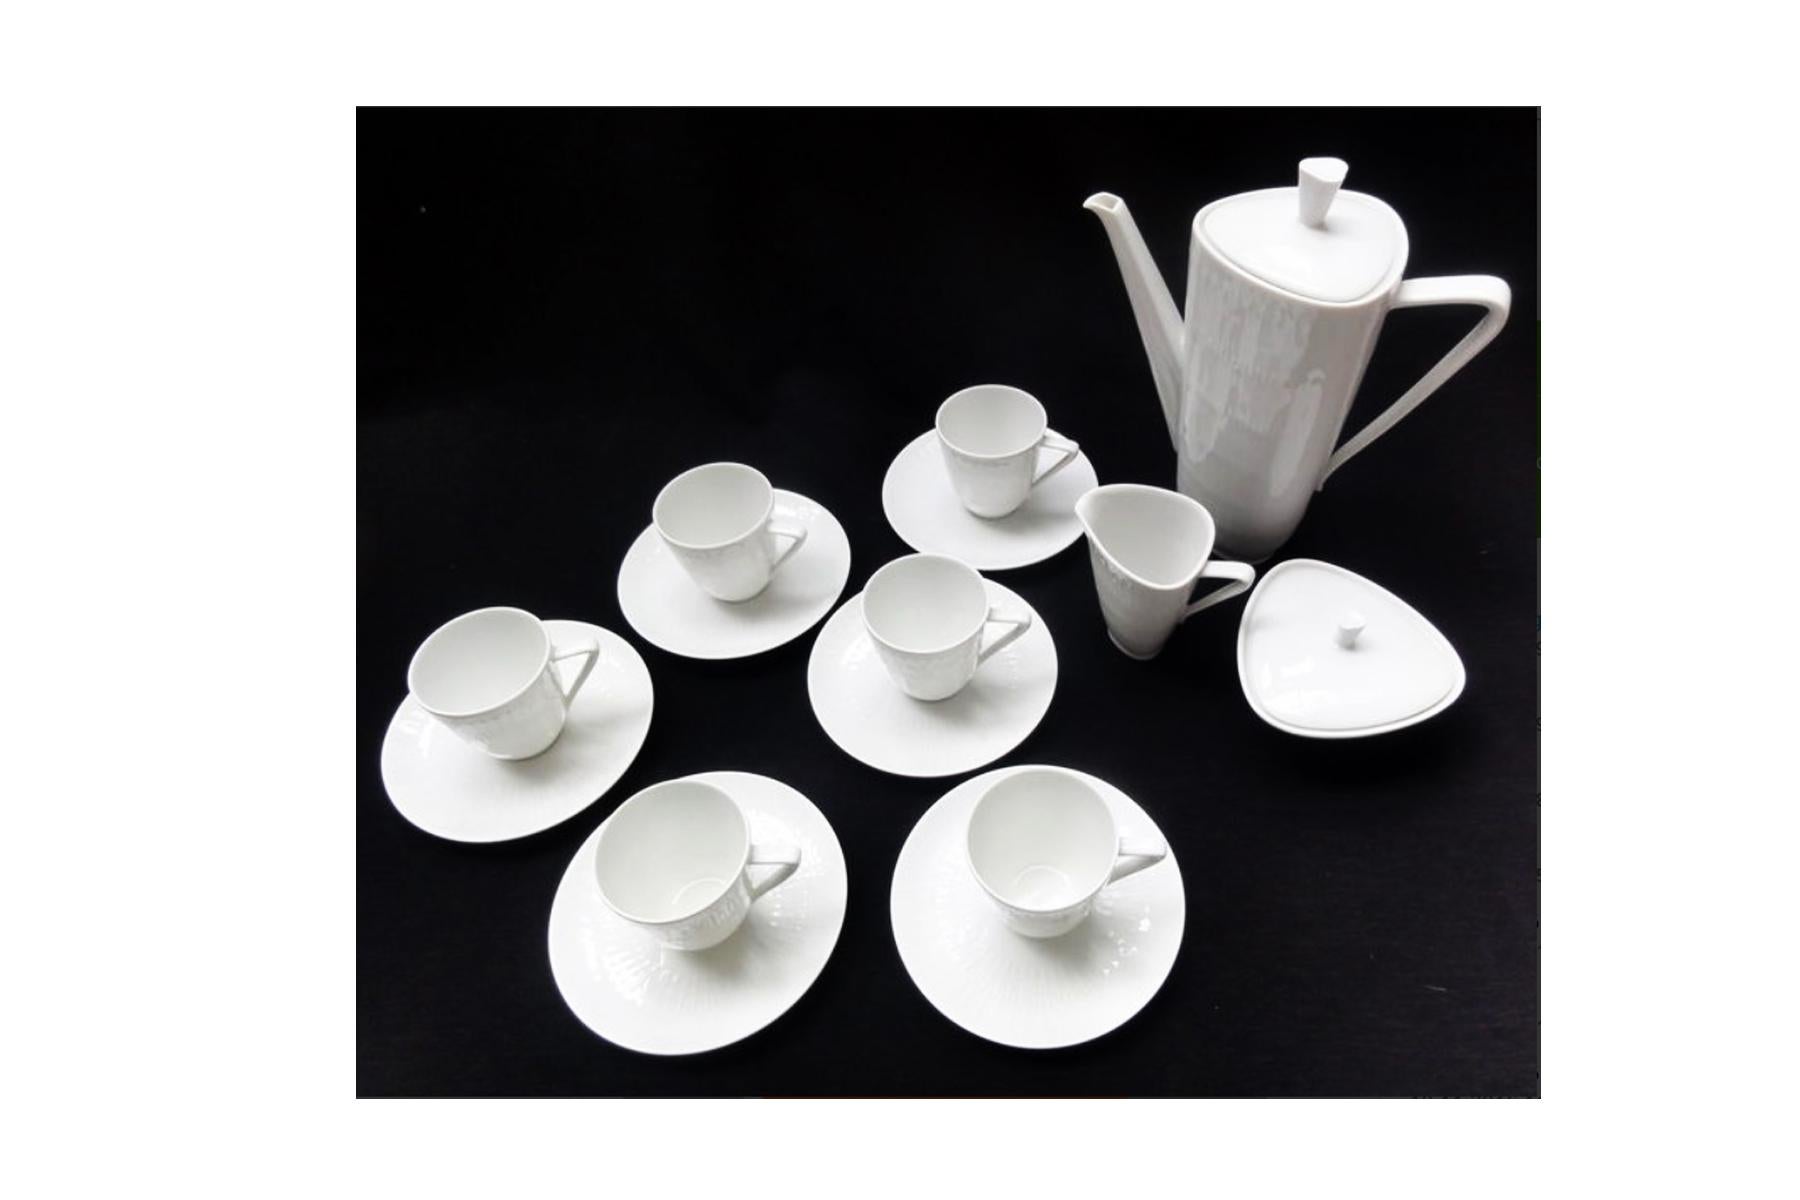 Beautiful complete ‘Apart’ coffee set from Hutschenreuther Selb, with 6 cups, 6 saucers, coffee pot, creamer and sugar bowl.

After the end of WWII Hutschenreuther (founded in 1814) commissioned many famous artists to design sets for them, of